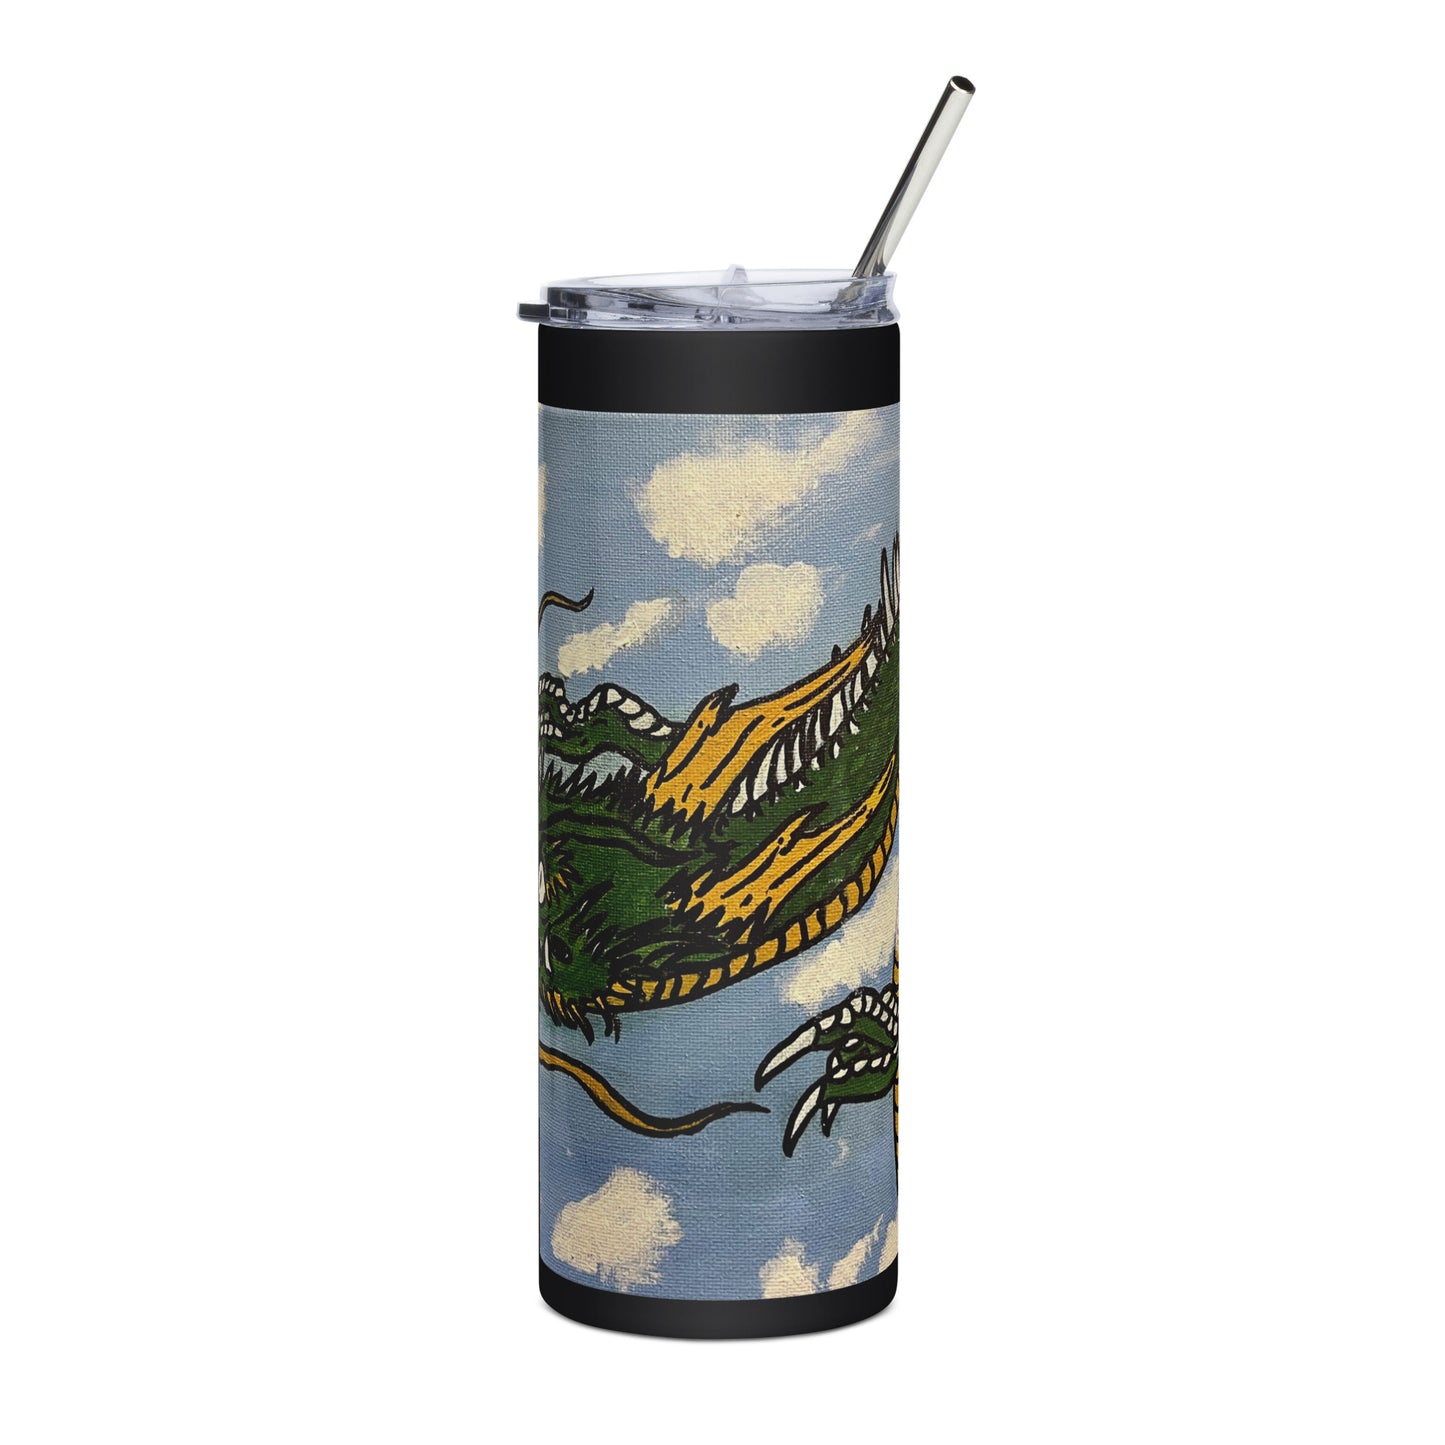 "Dragon in the clouds" tumbler